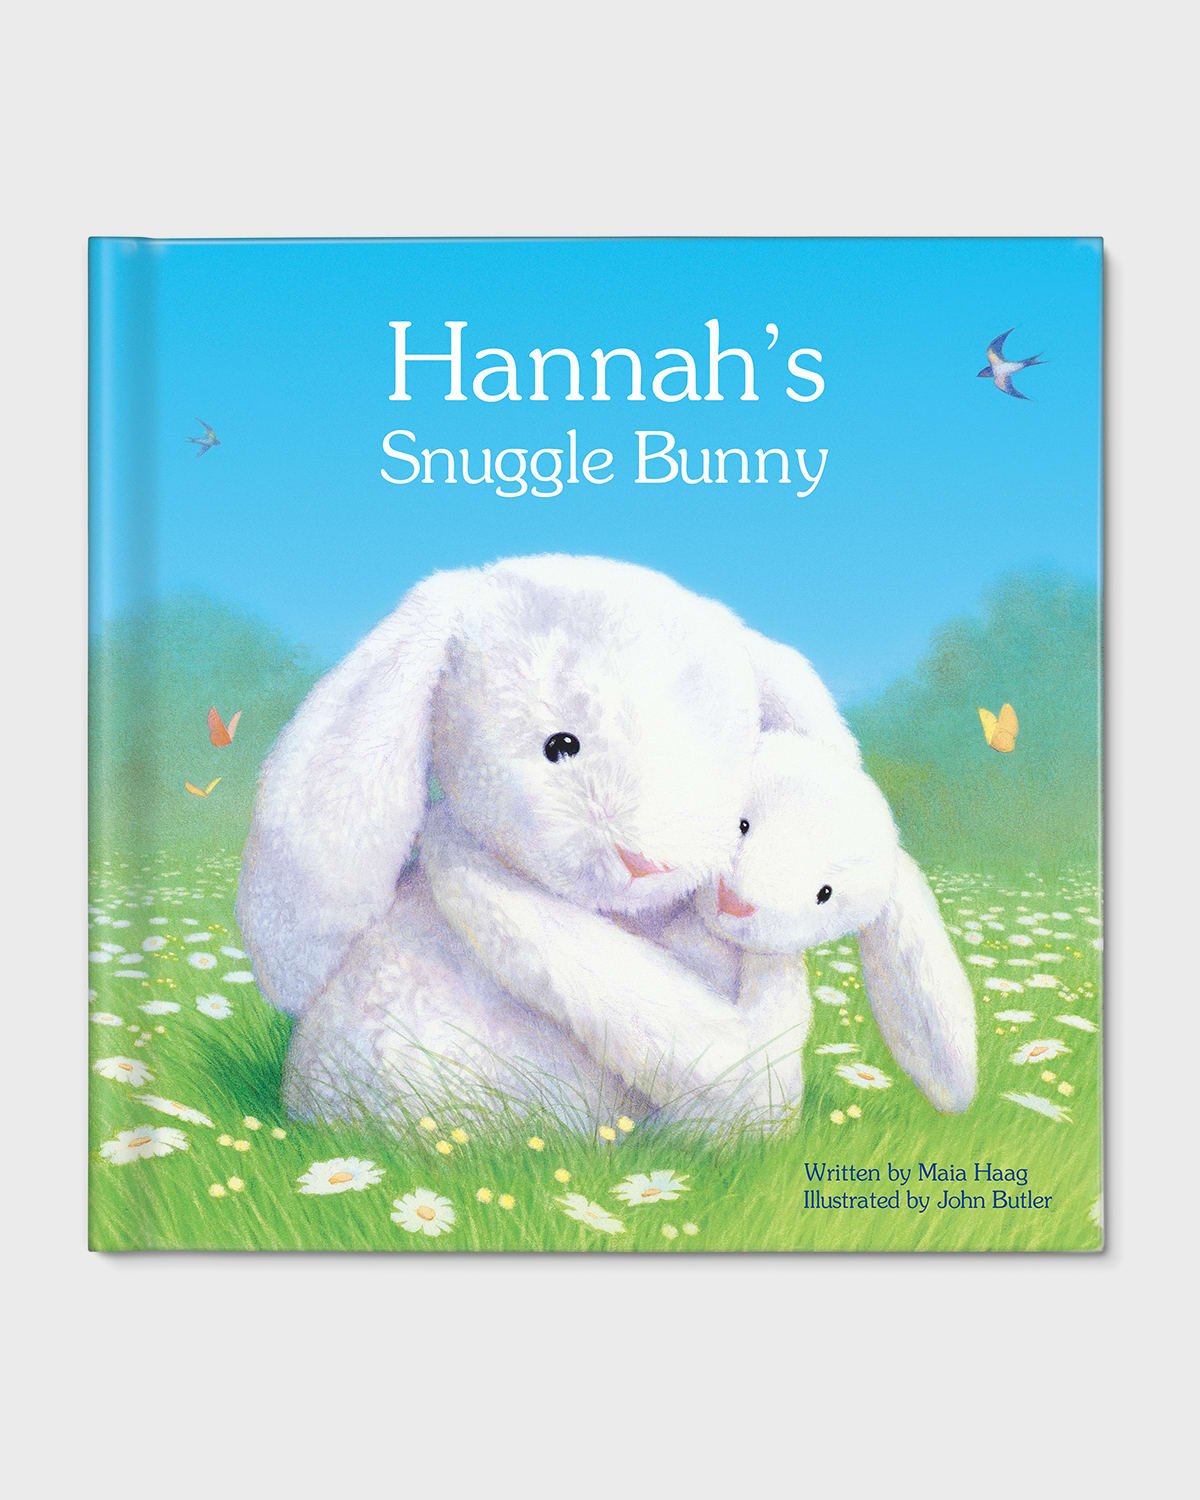 My Snuggle Bunny Book by Maia Haag, Personalized